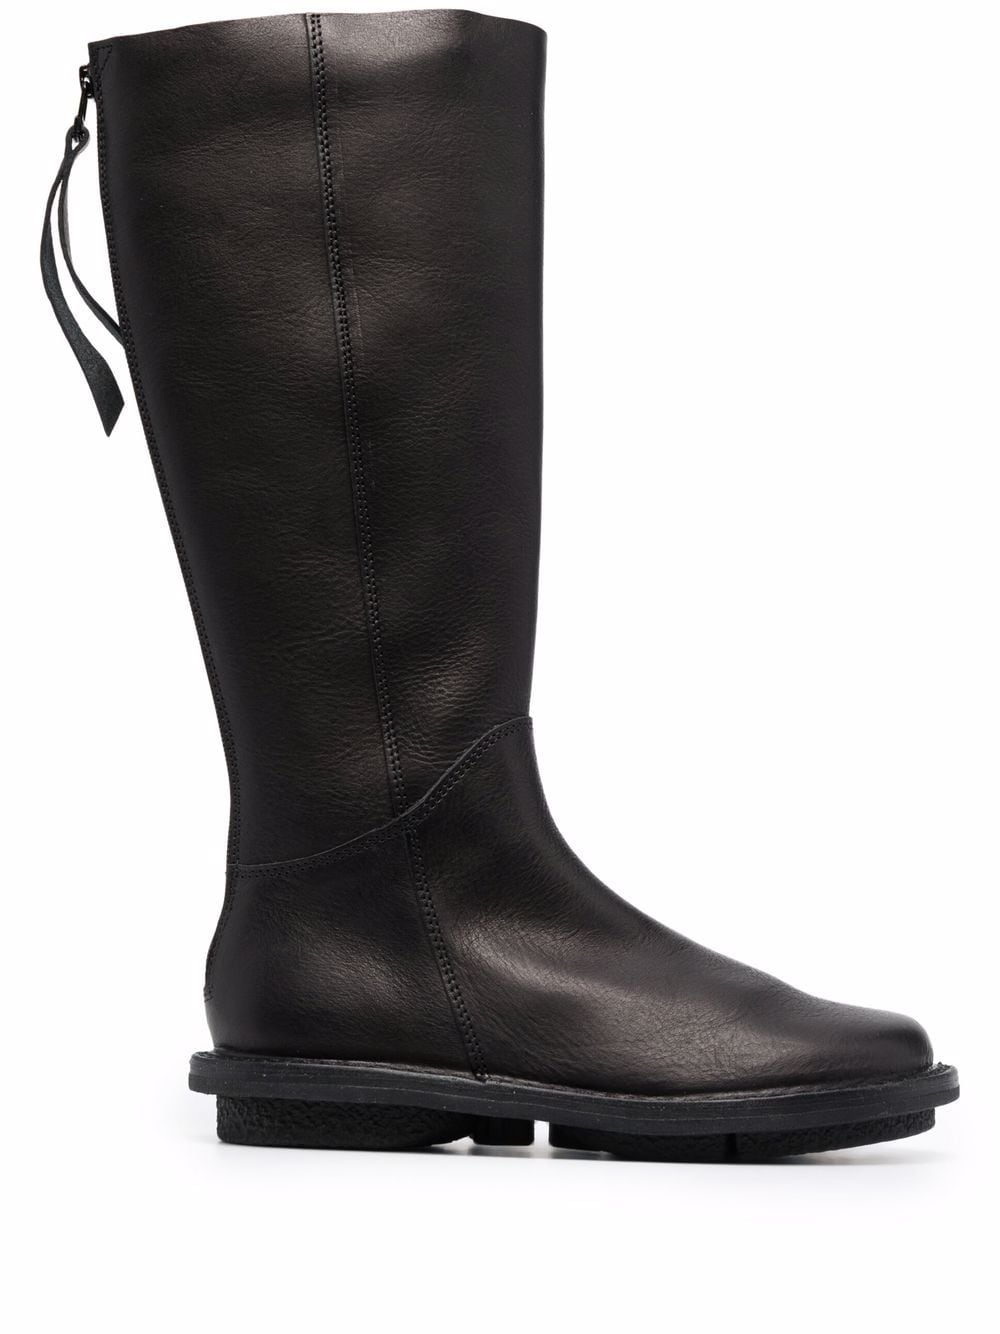 Trippen Wall-f Leather Boots - Farfetch